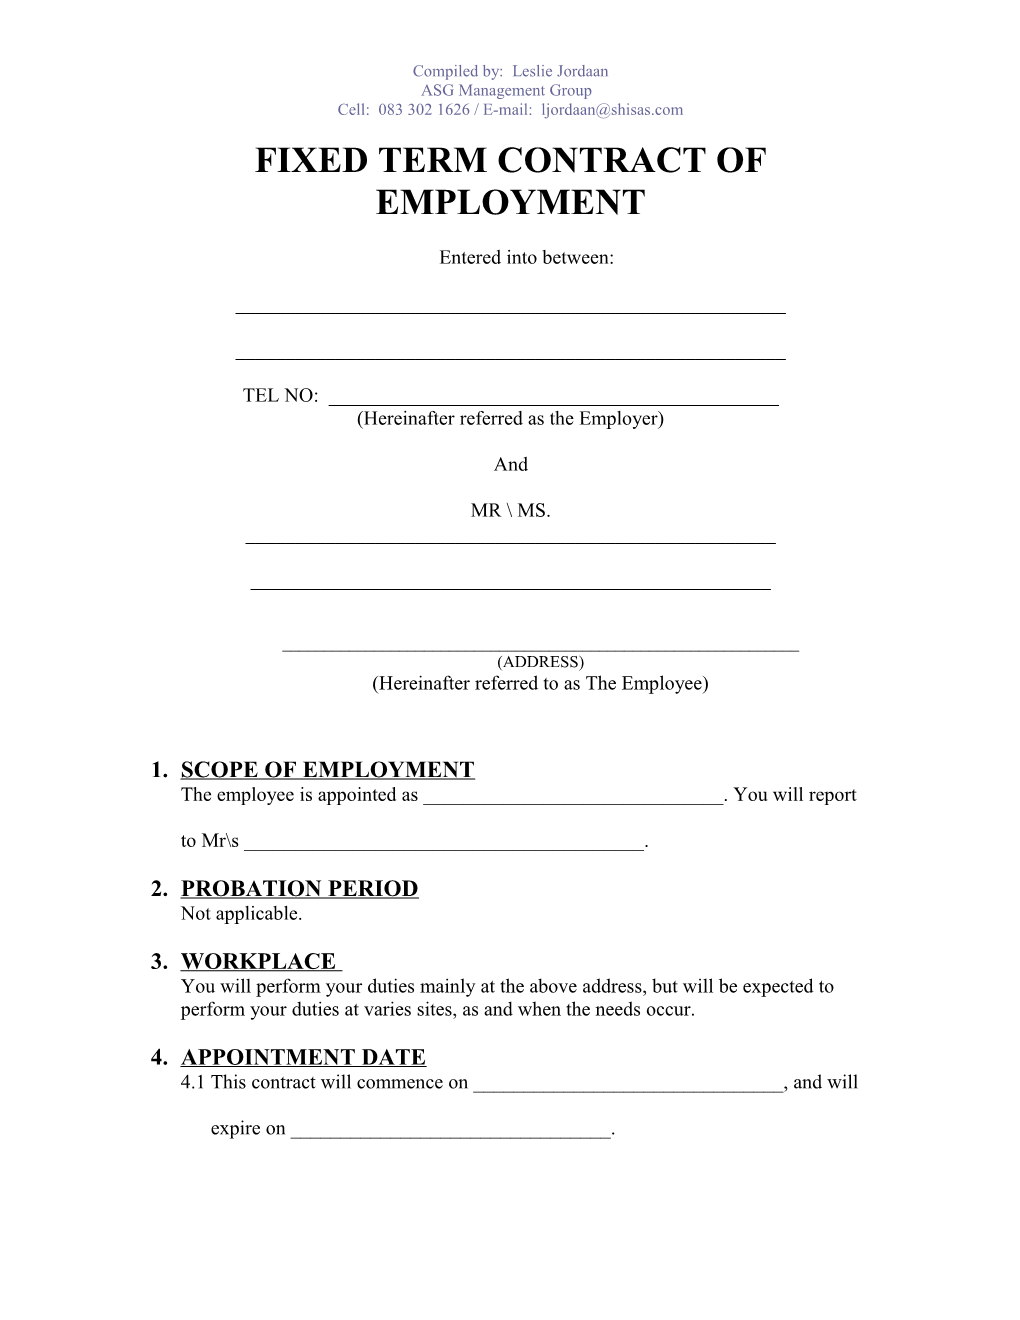 Fixed Term Contract of Employment